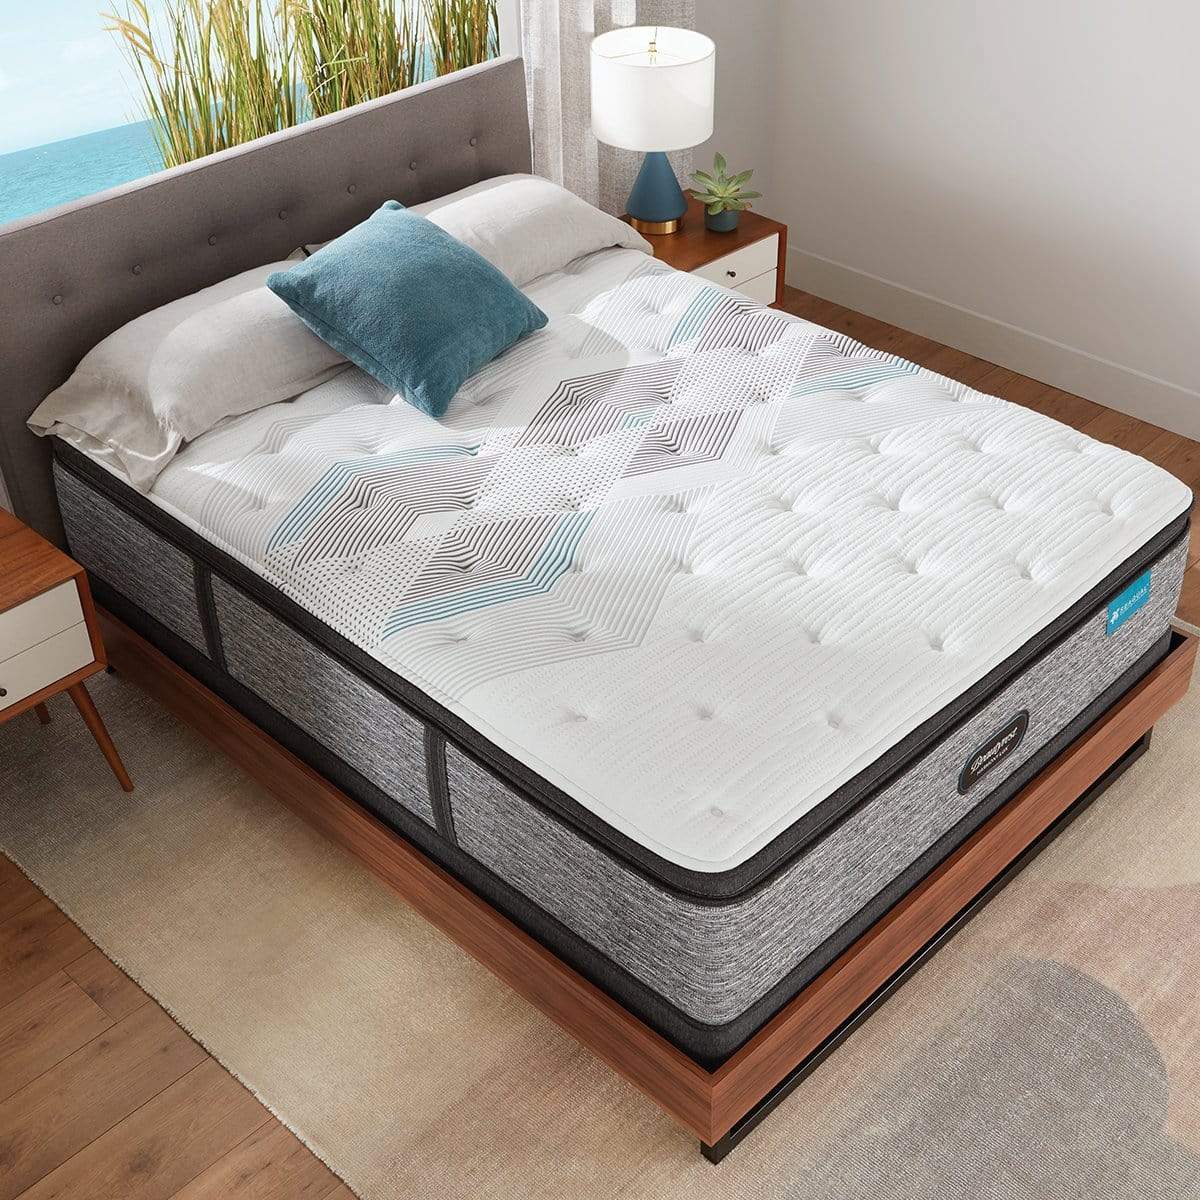 Picture of Beautyrest Harmony Lux Carbon Medium Pillowtop Mattress